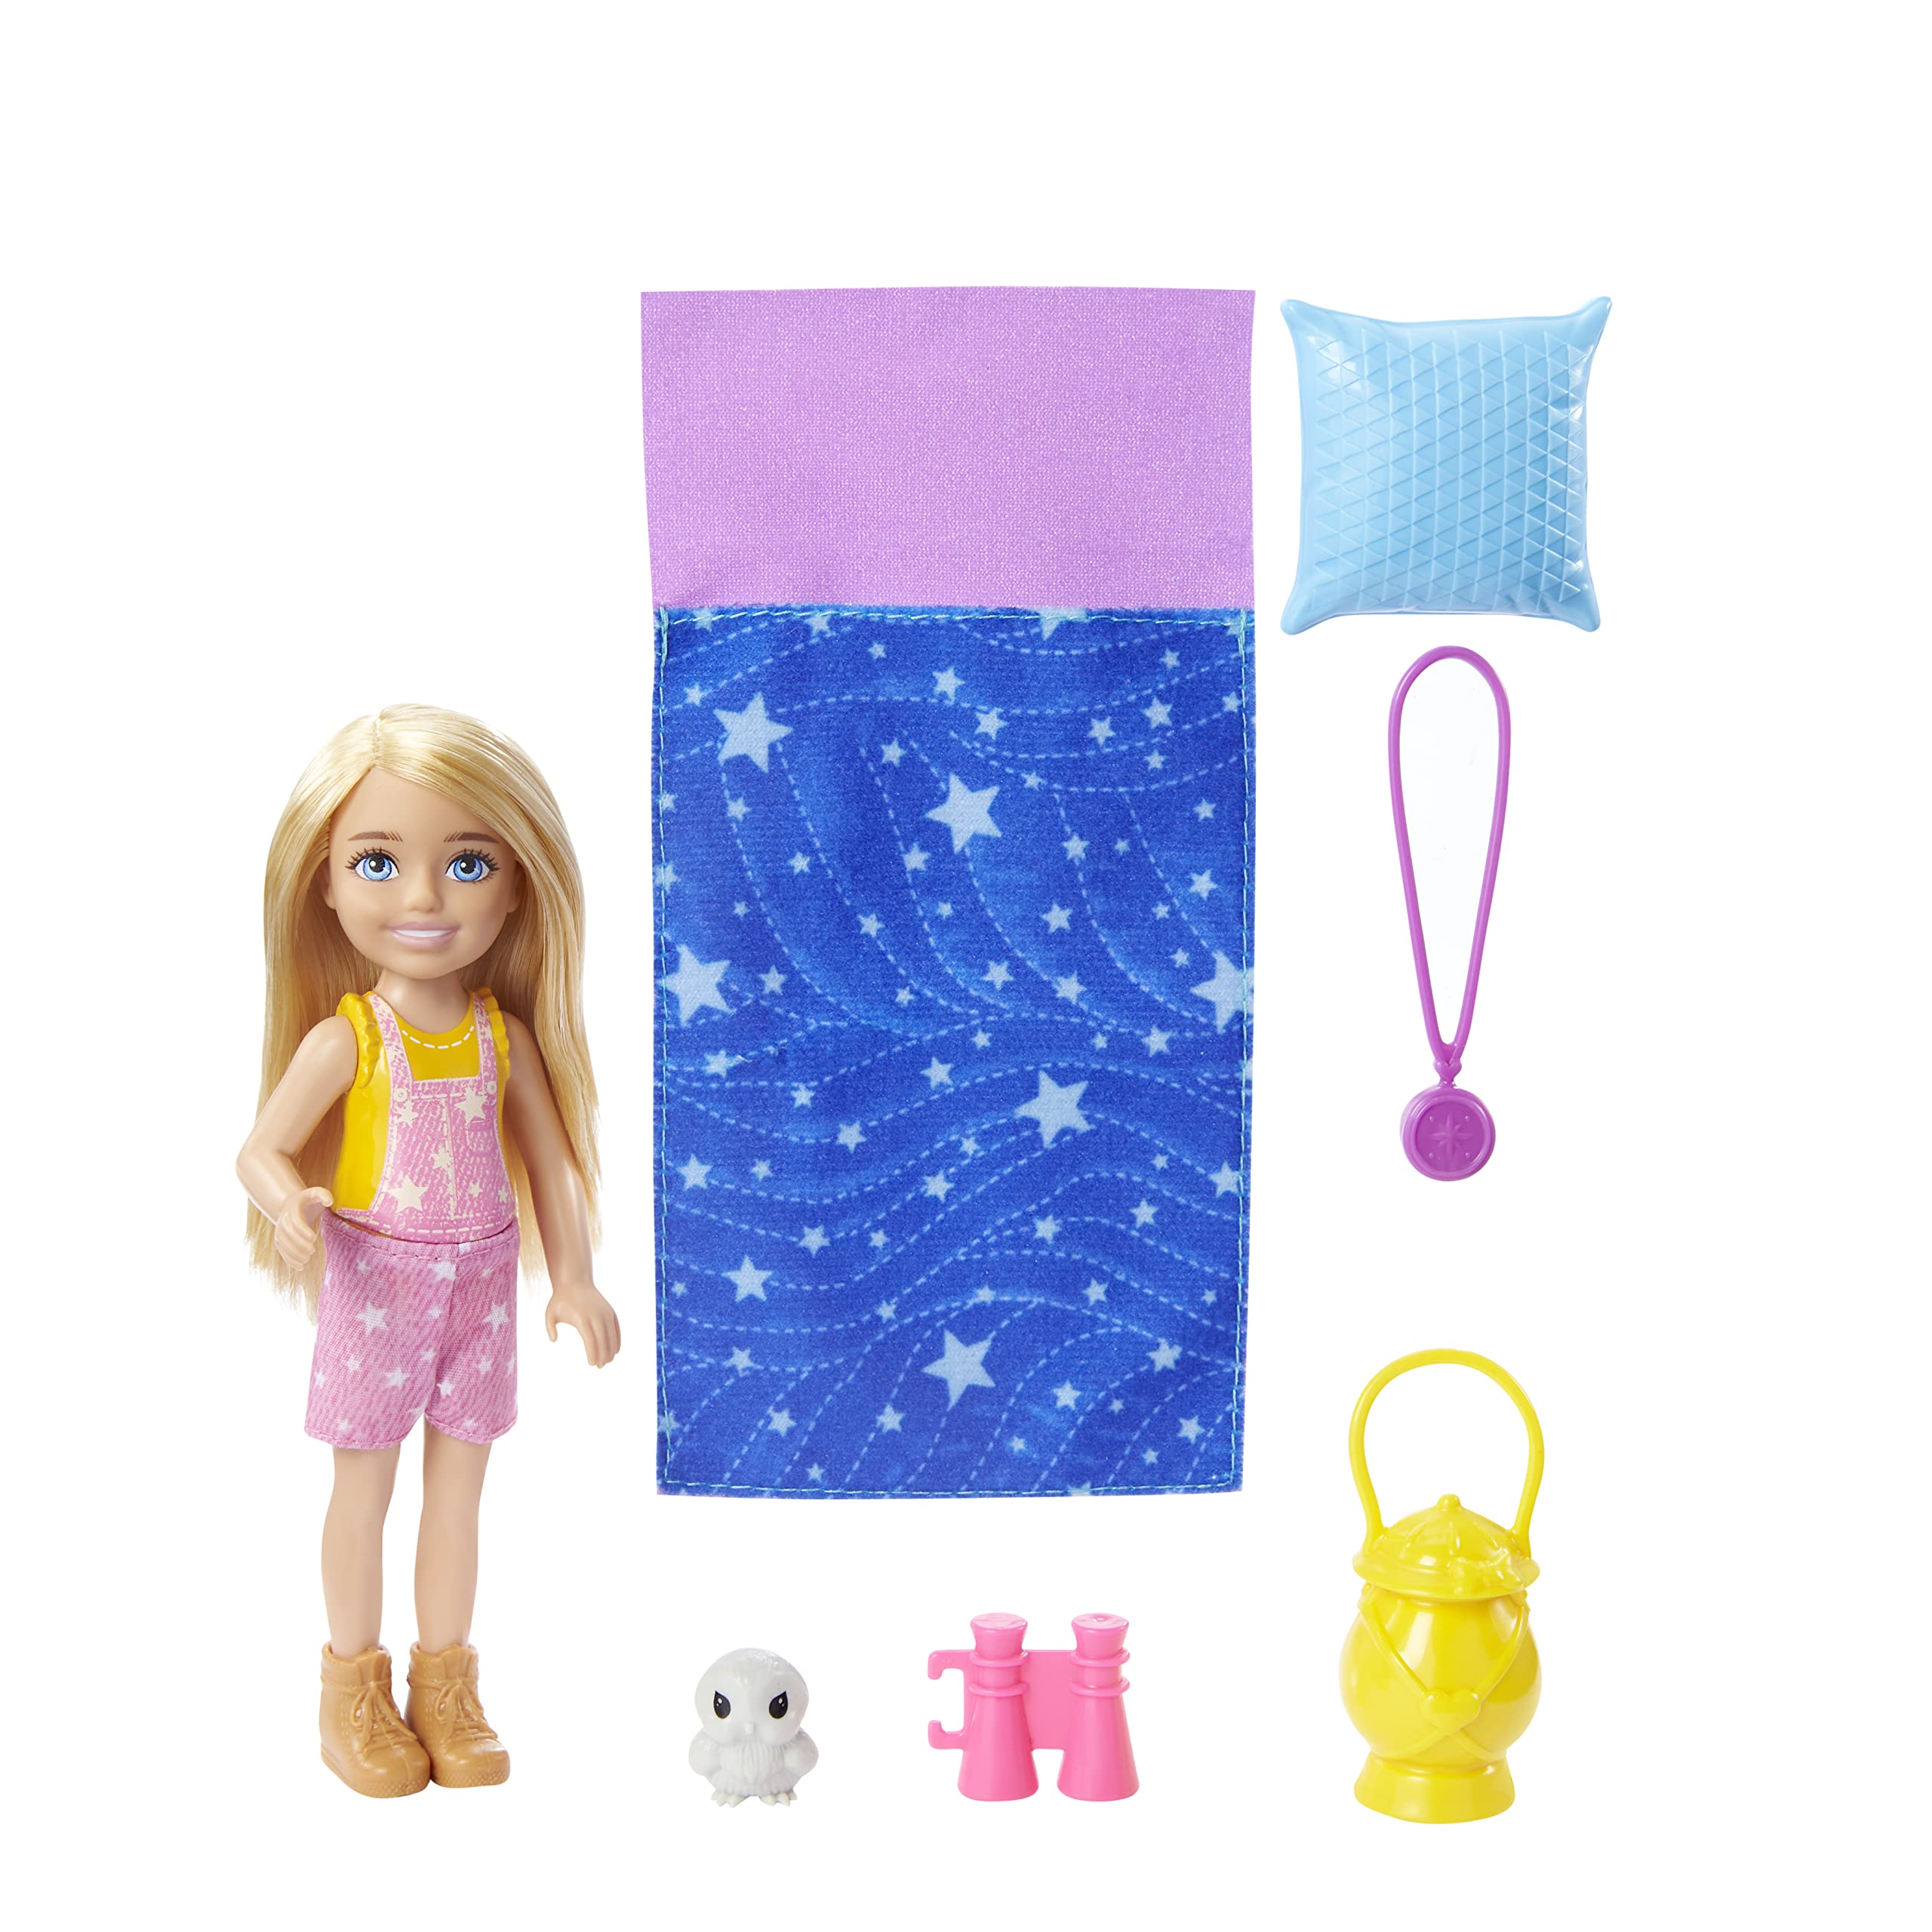 Barbie It Takes Two Doll & Accessories, Camping Playset with Owl, Sleeping Bag & Accessories, Blonde Chelsea Small Doll